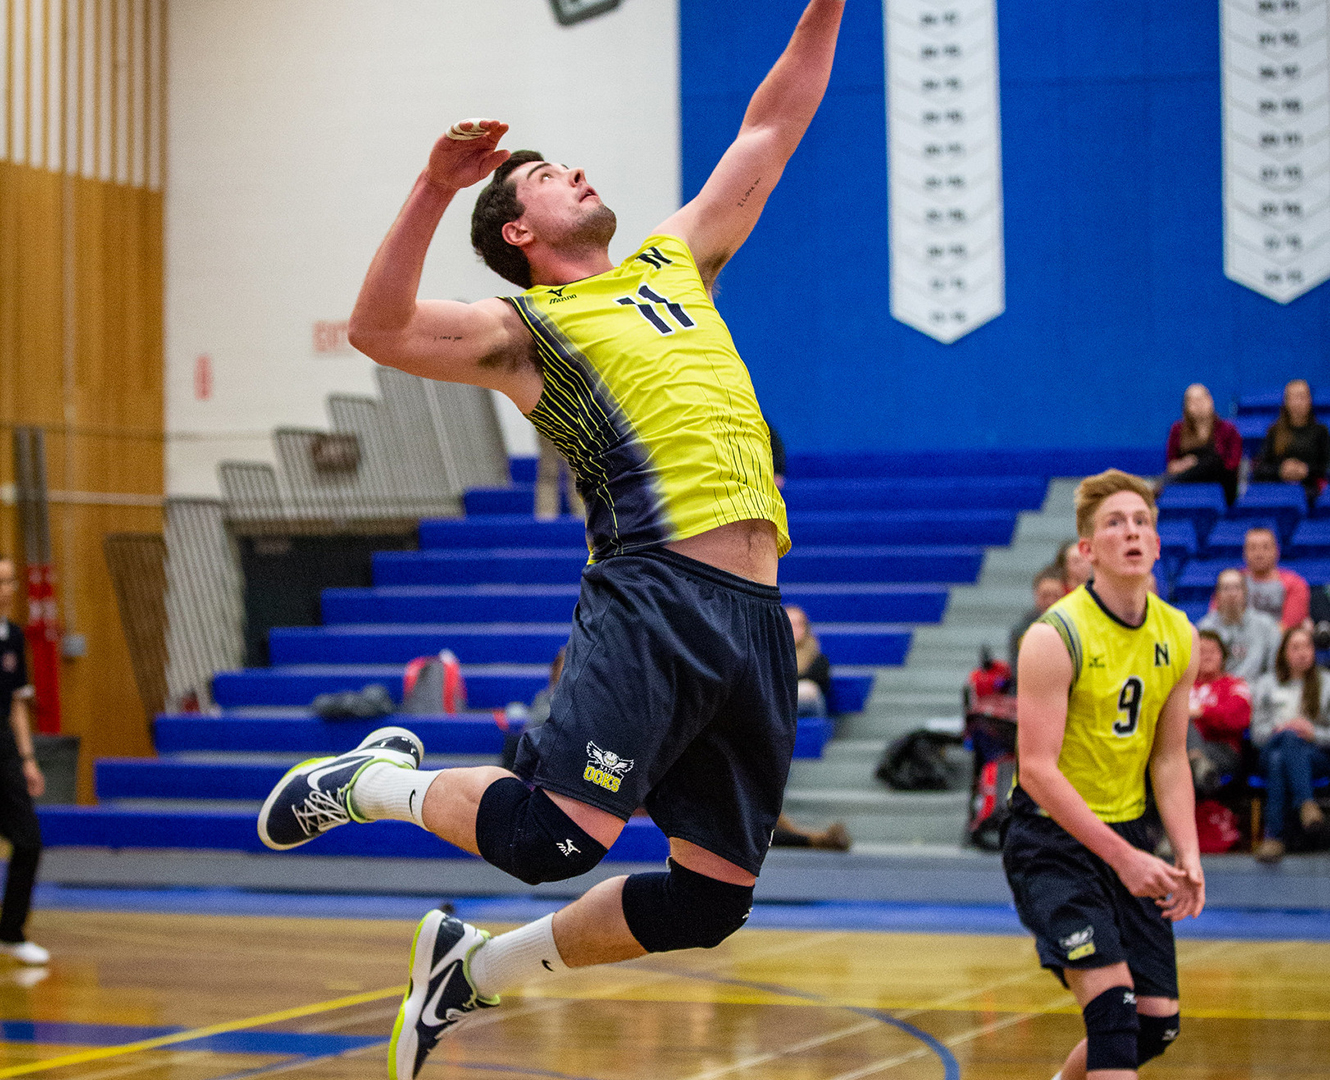 Shapka hits a serve in a Nait ooks volleyball game.